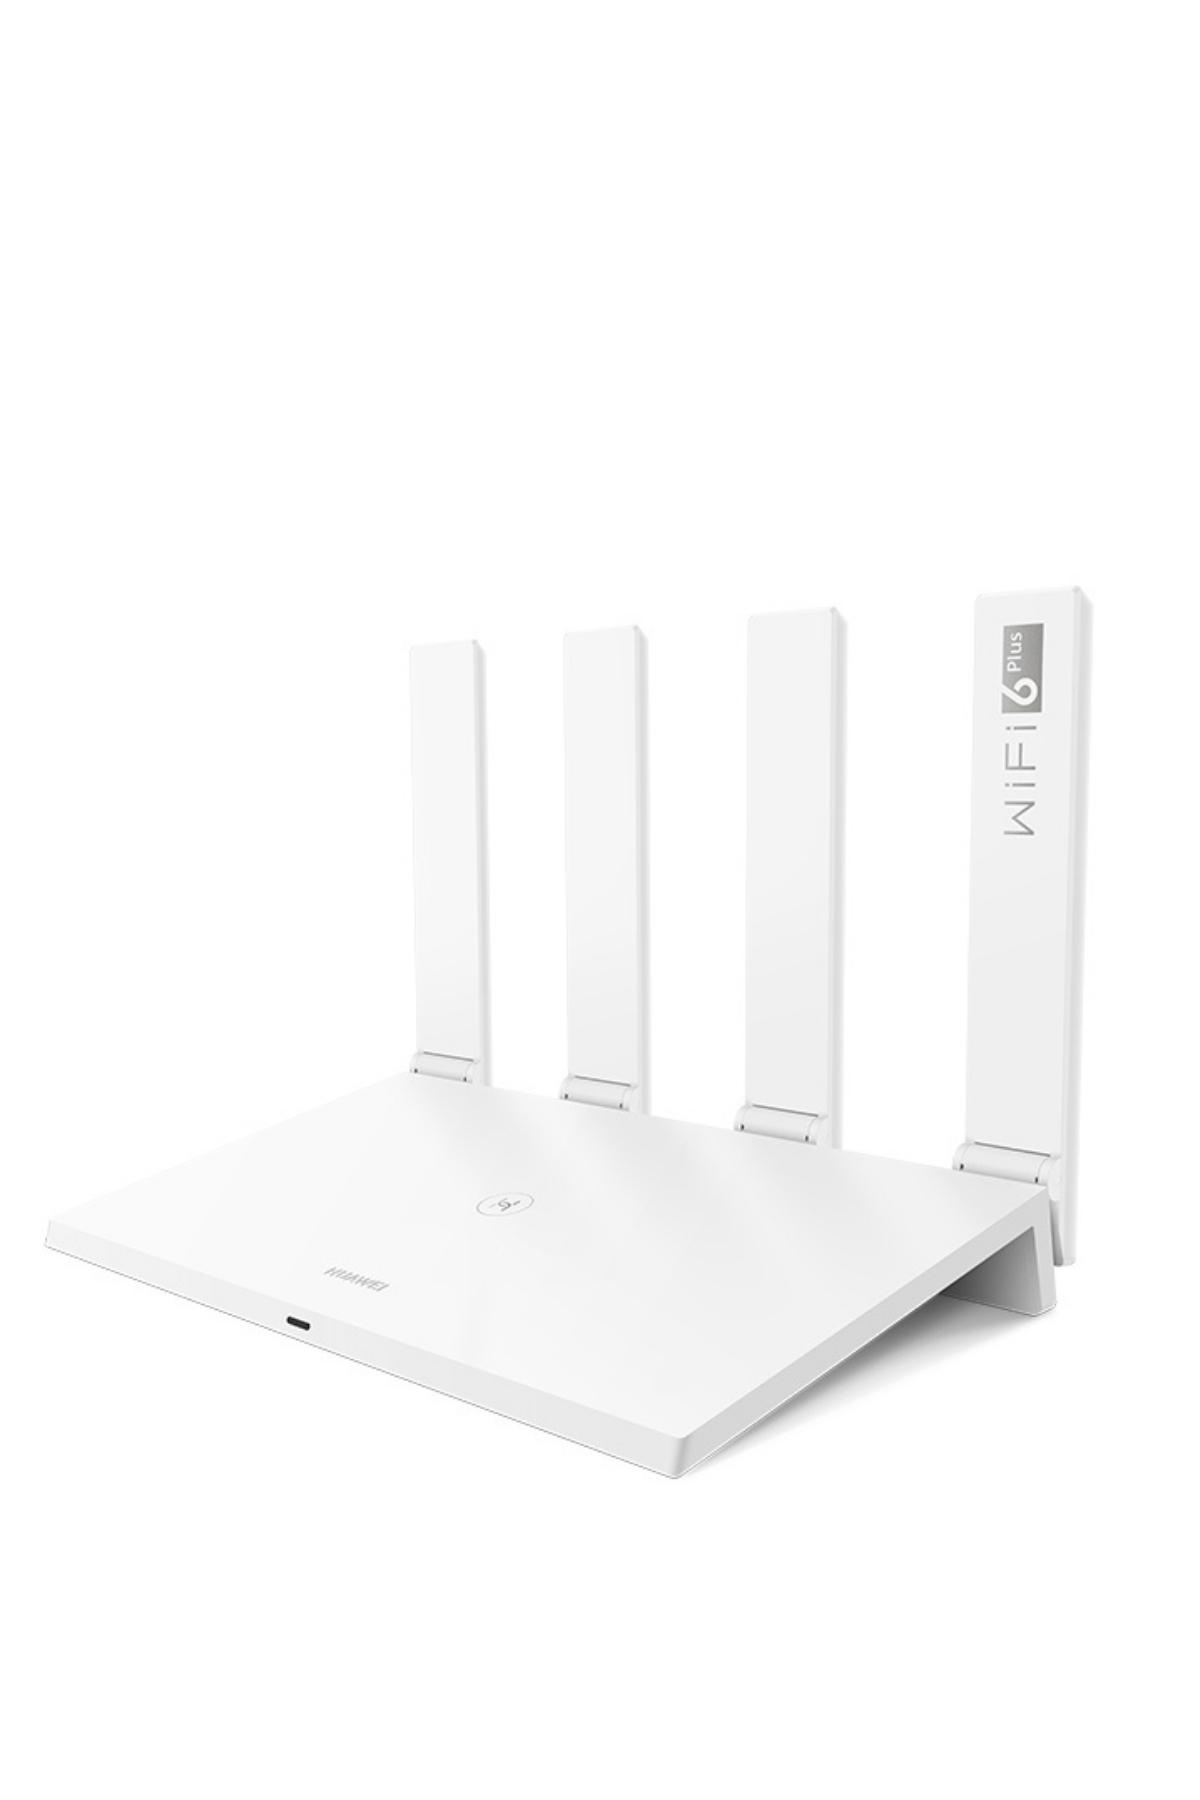 Huawei AX3 Router 